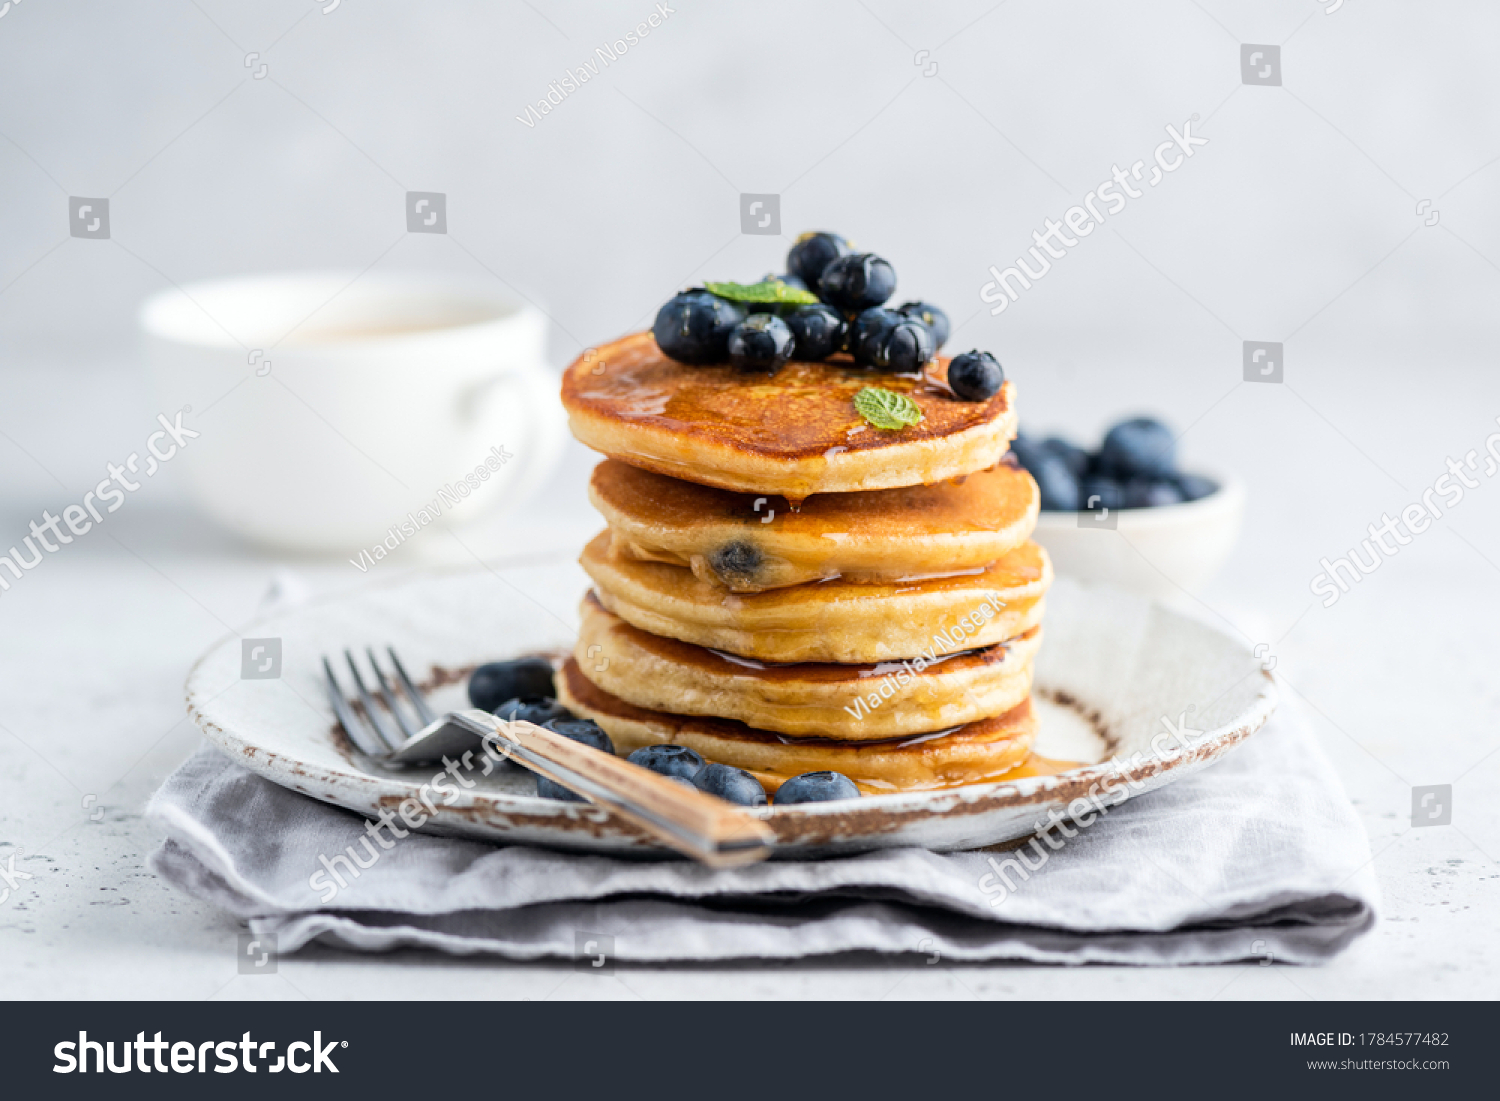 Tasty pancakes with blueberries and honey on a plate. Grey background #1784577482